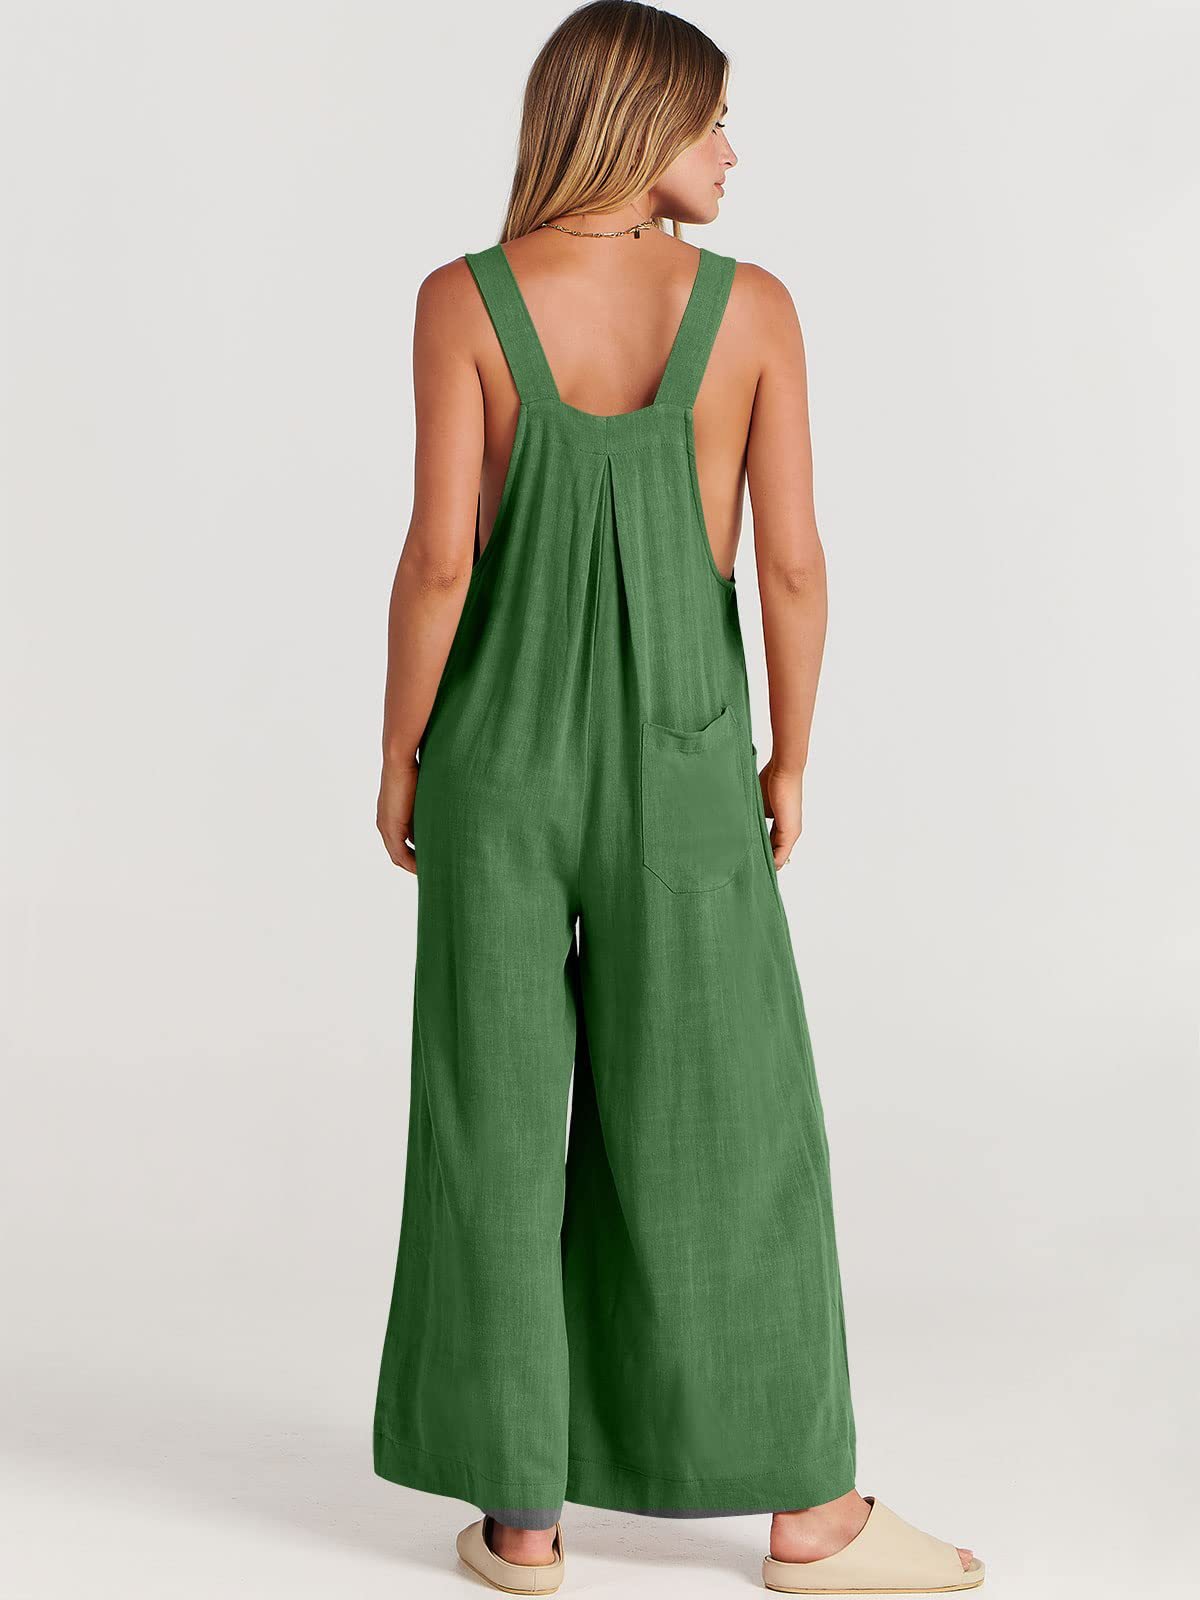 LAST DAY 50% OFF🔥-Plus Size Wide Leg Overalls Jumpsuit (Buy 2 Free Shipping)